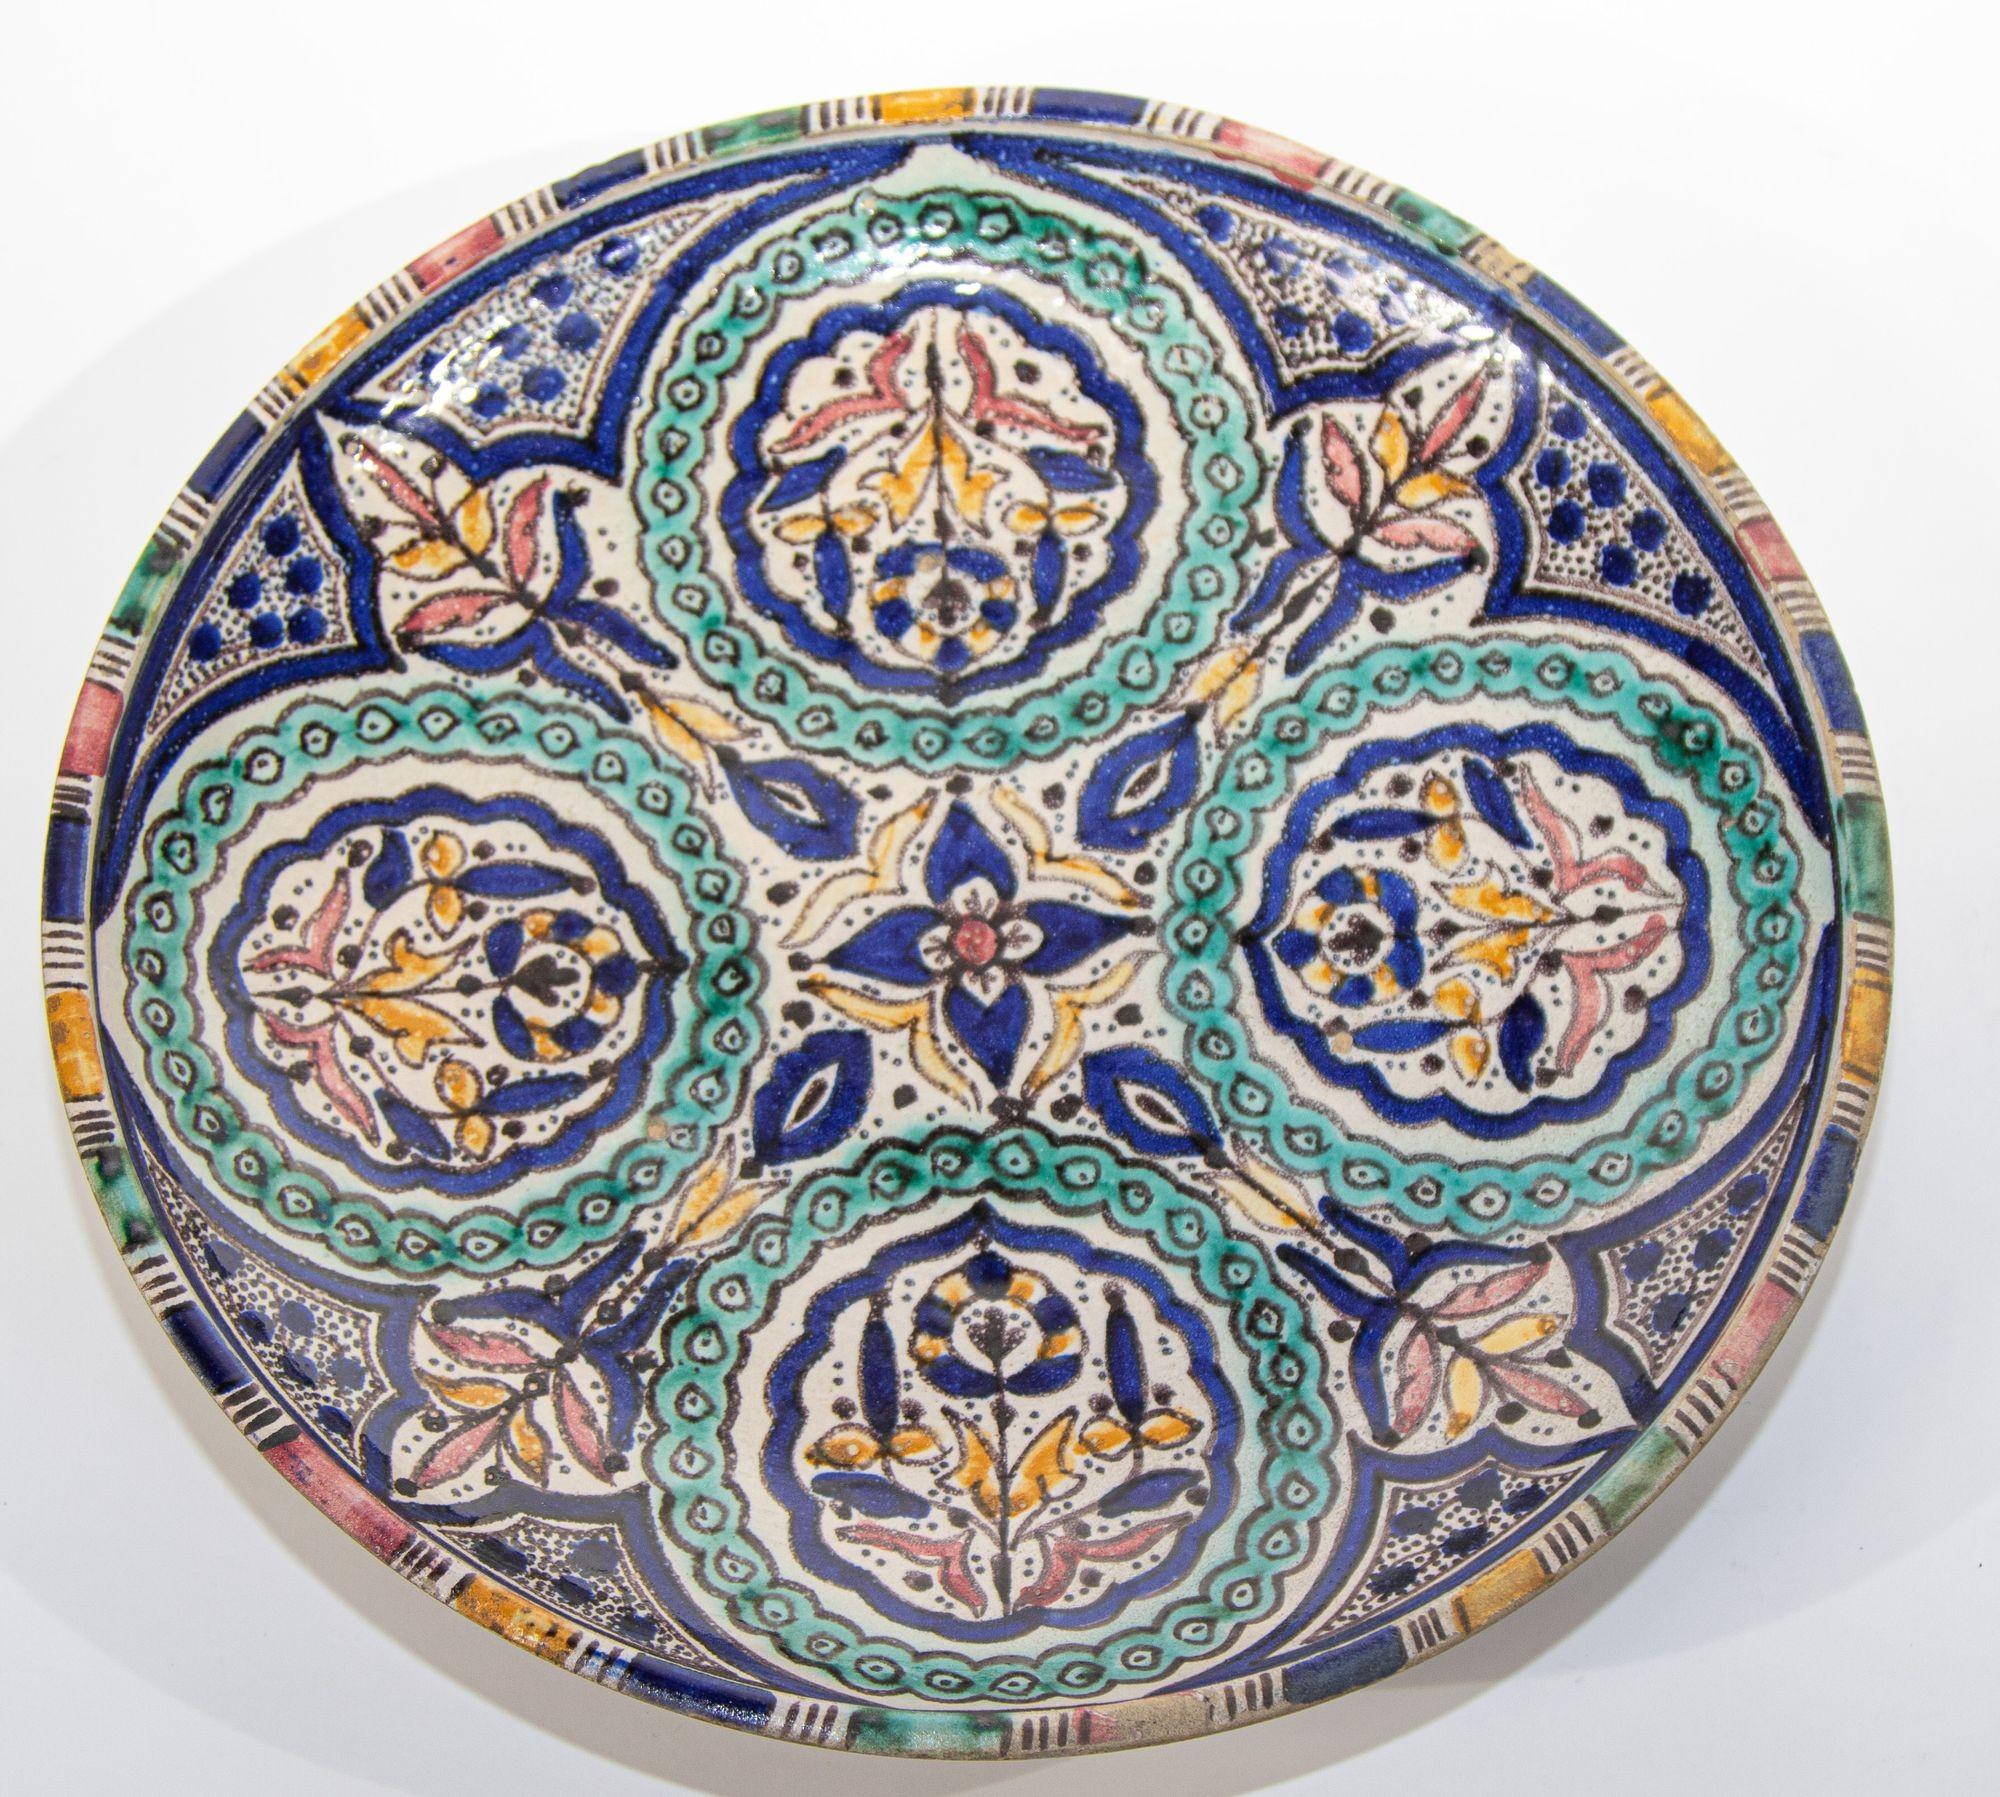 Antique hand-painted and handcrafted Moroccan ceramic bowl or wall art decorative plate,
Large Moroccan ceramic bowl handcrafted in Fez by artisans. Hand painted Moorish ceramic plate from Fez Morocco.
Hand-painted with natural minerals by